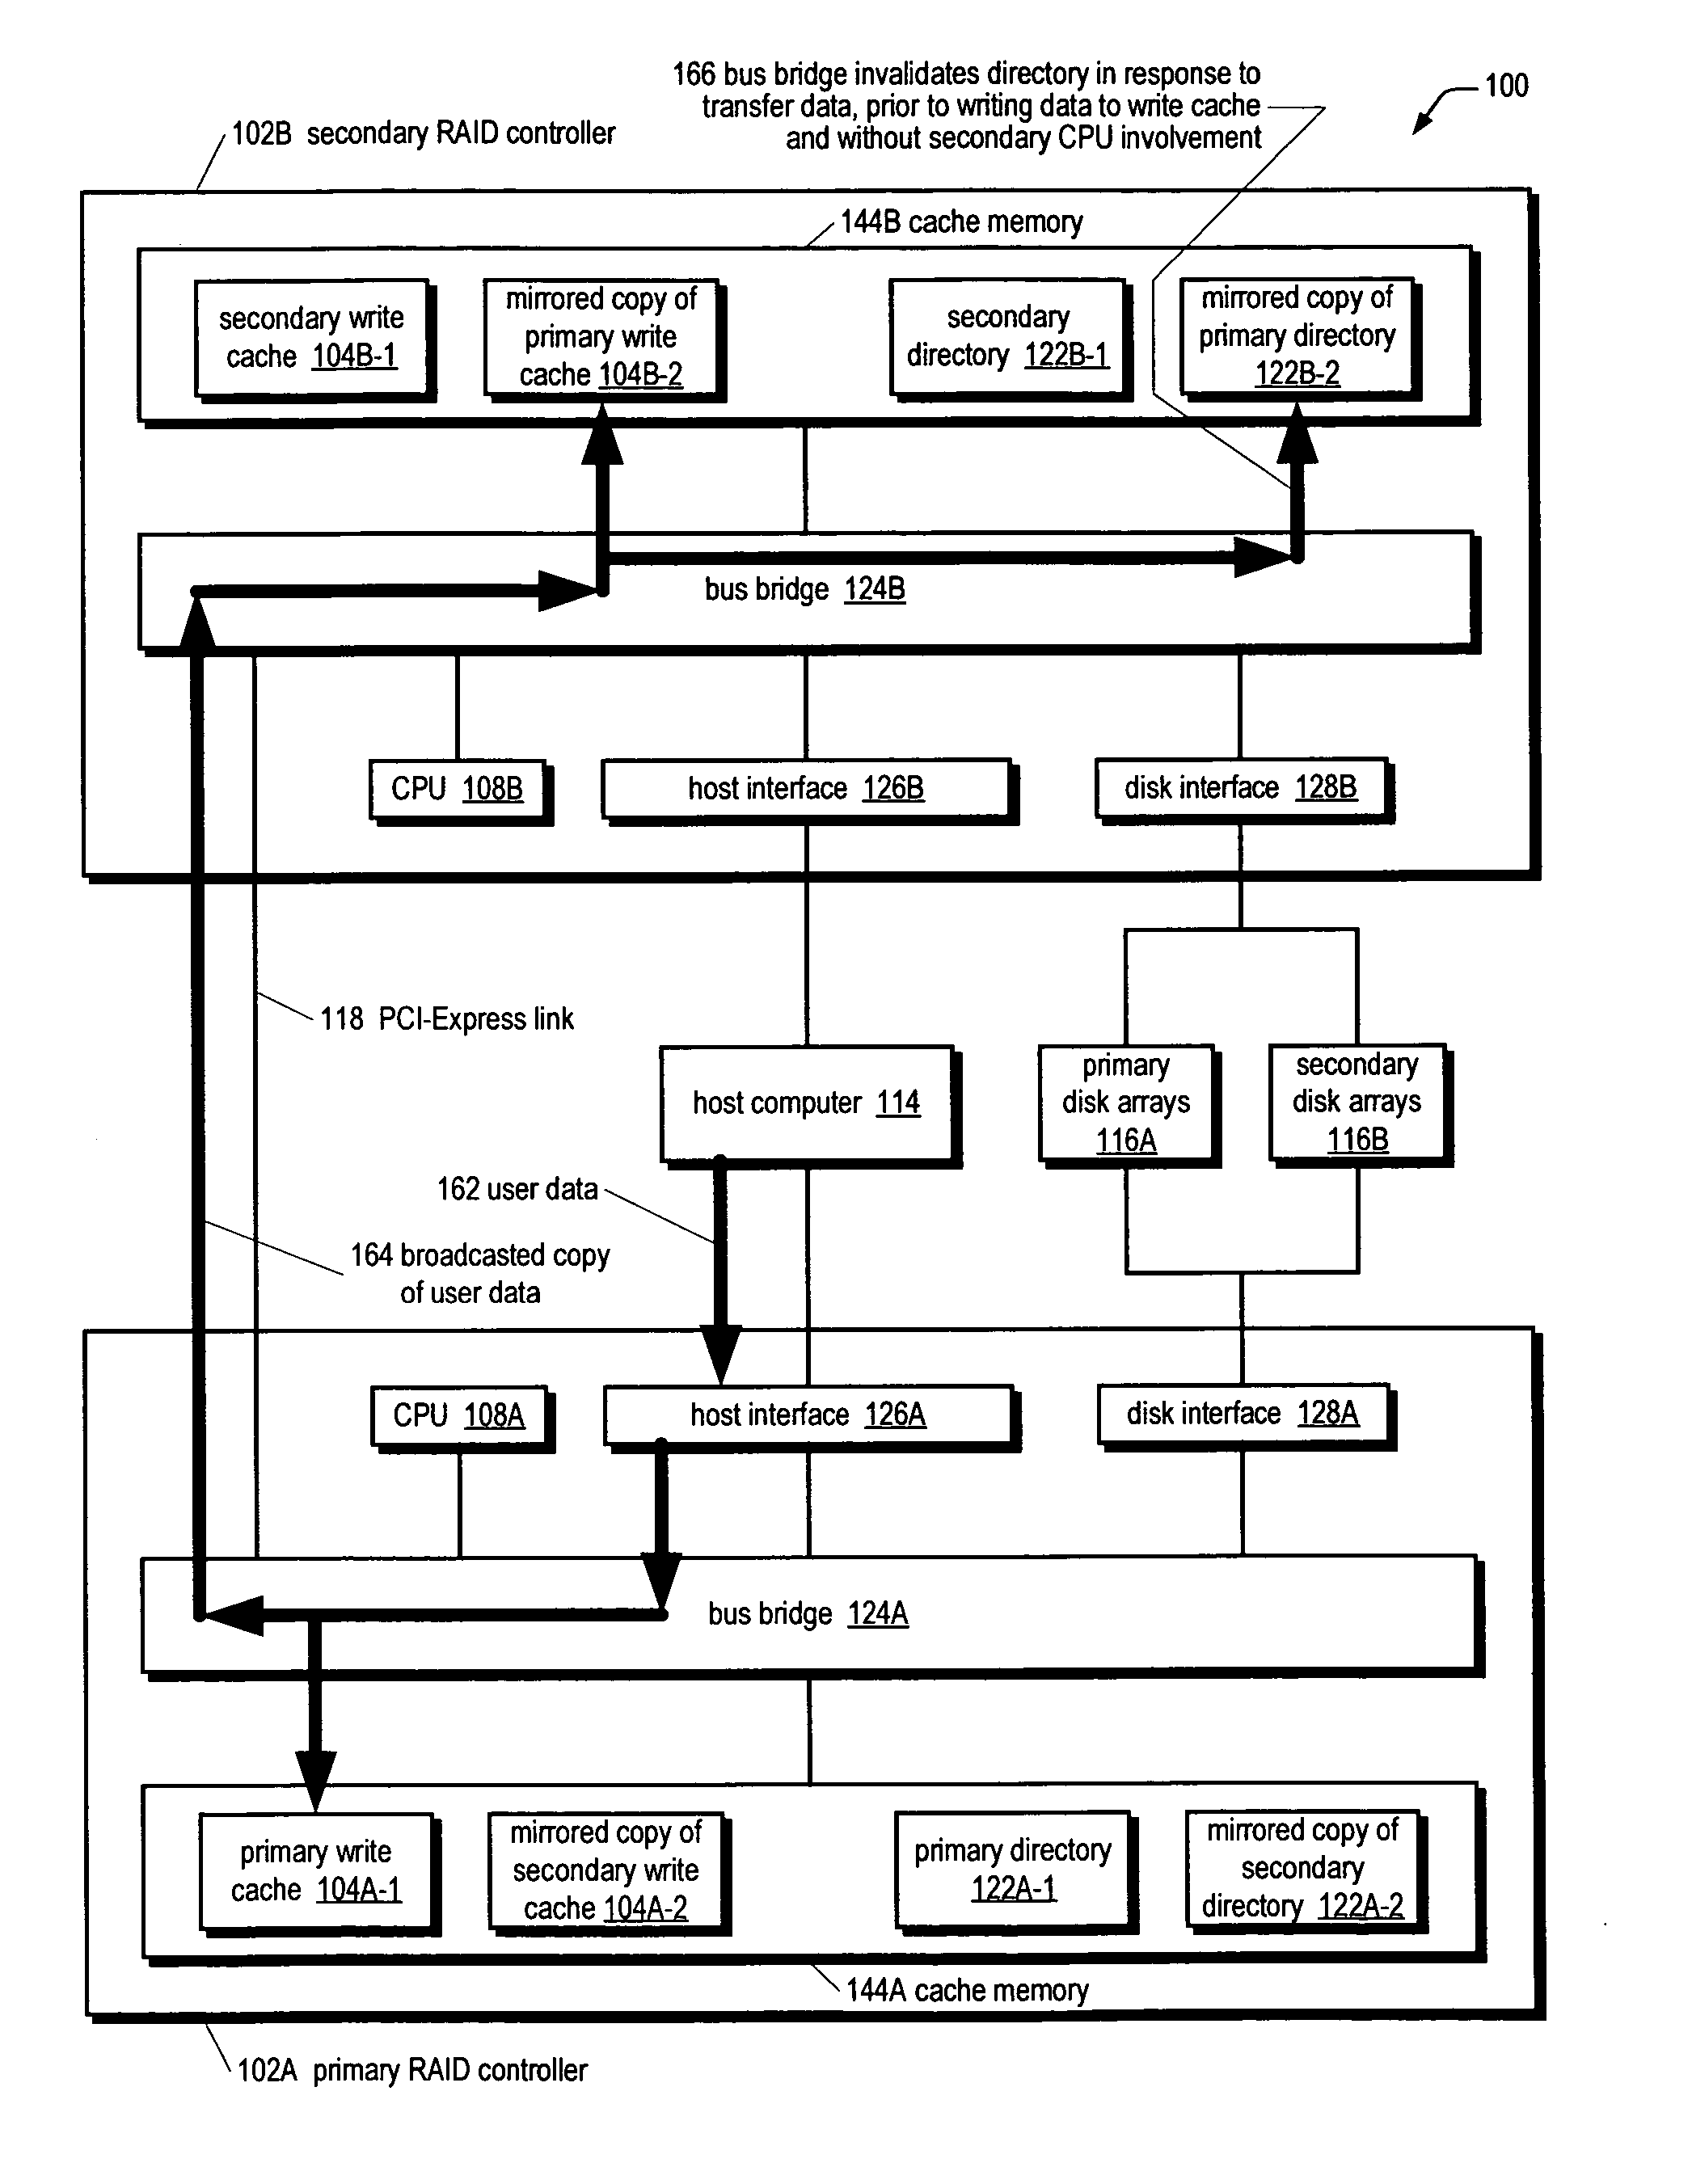 RAID system for performing efficient mirrored posted-write operations